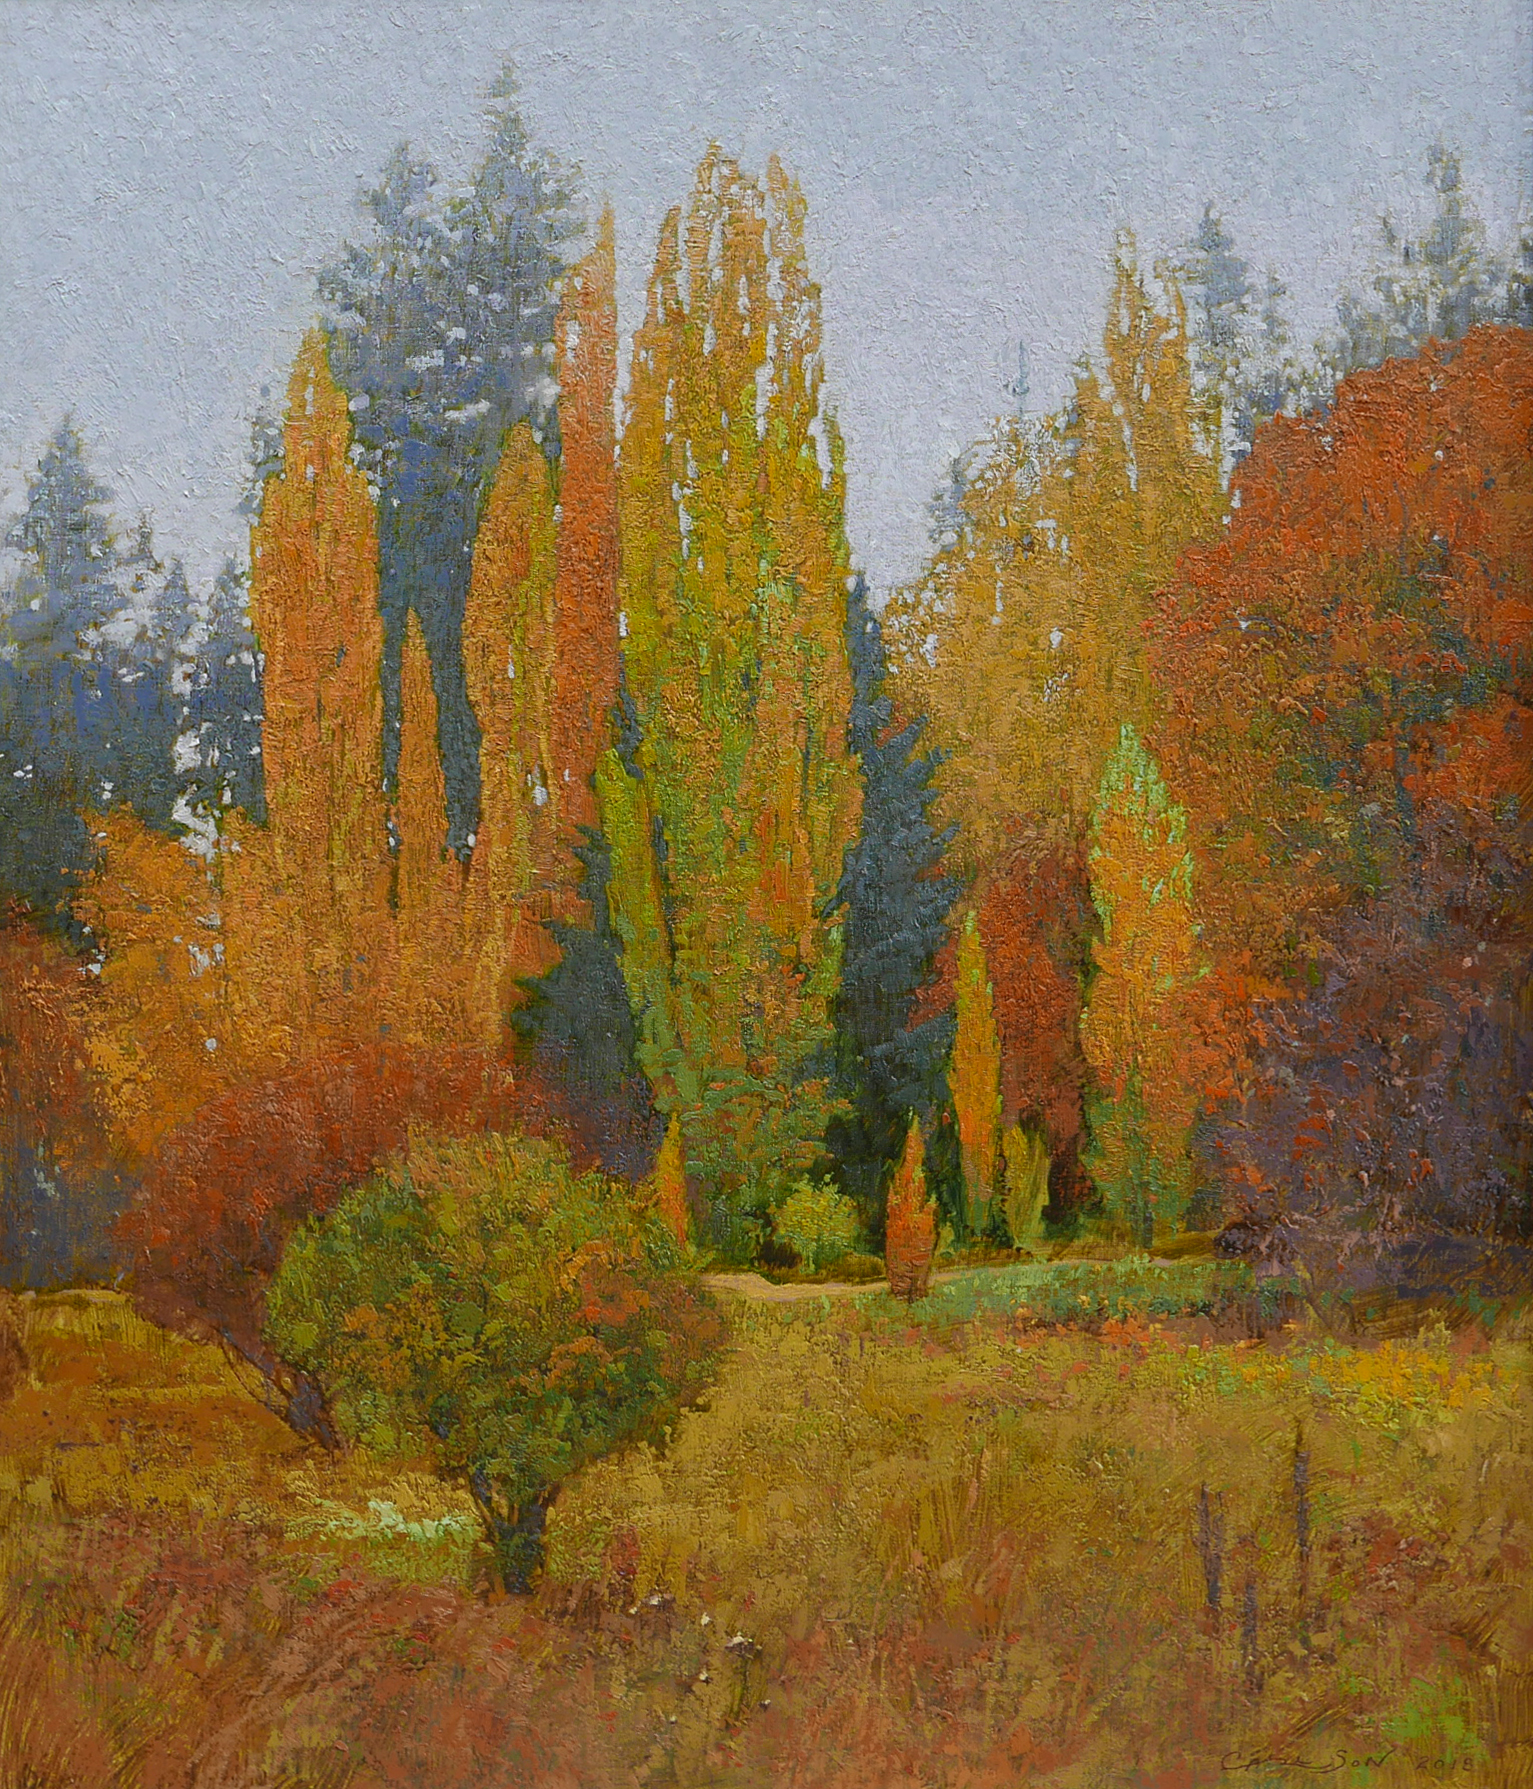 Lombardy Poplars of Medimont by George Carlson, 42 high X 36 wide, oil on linen $77,000.00